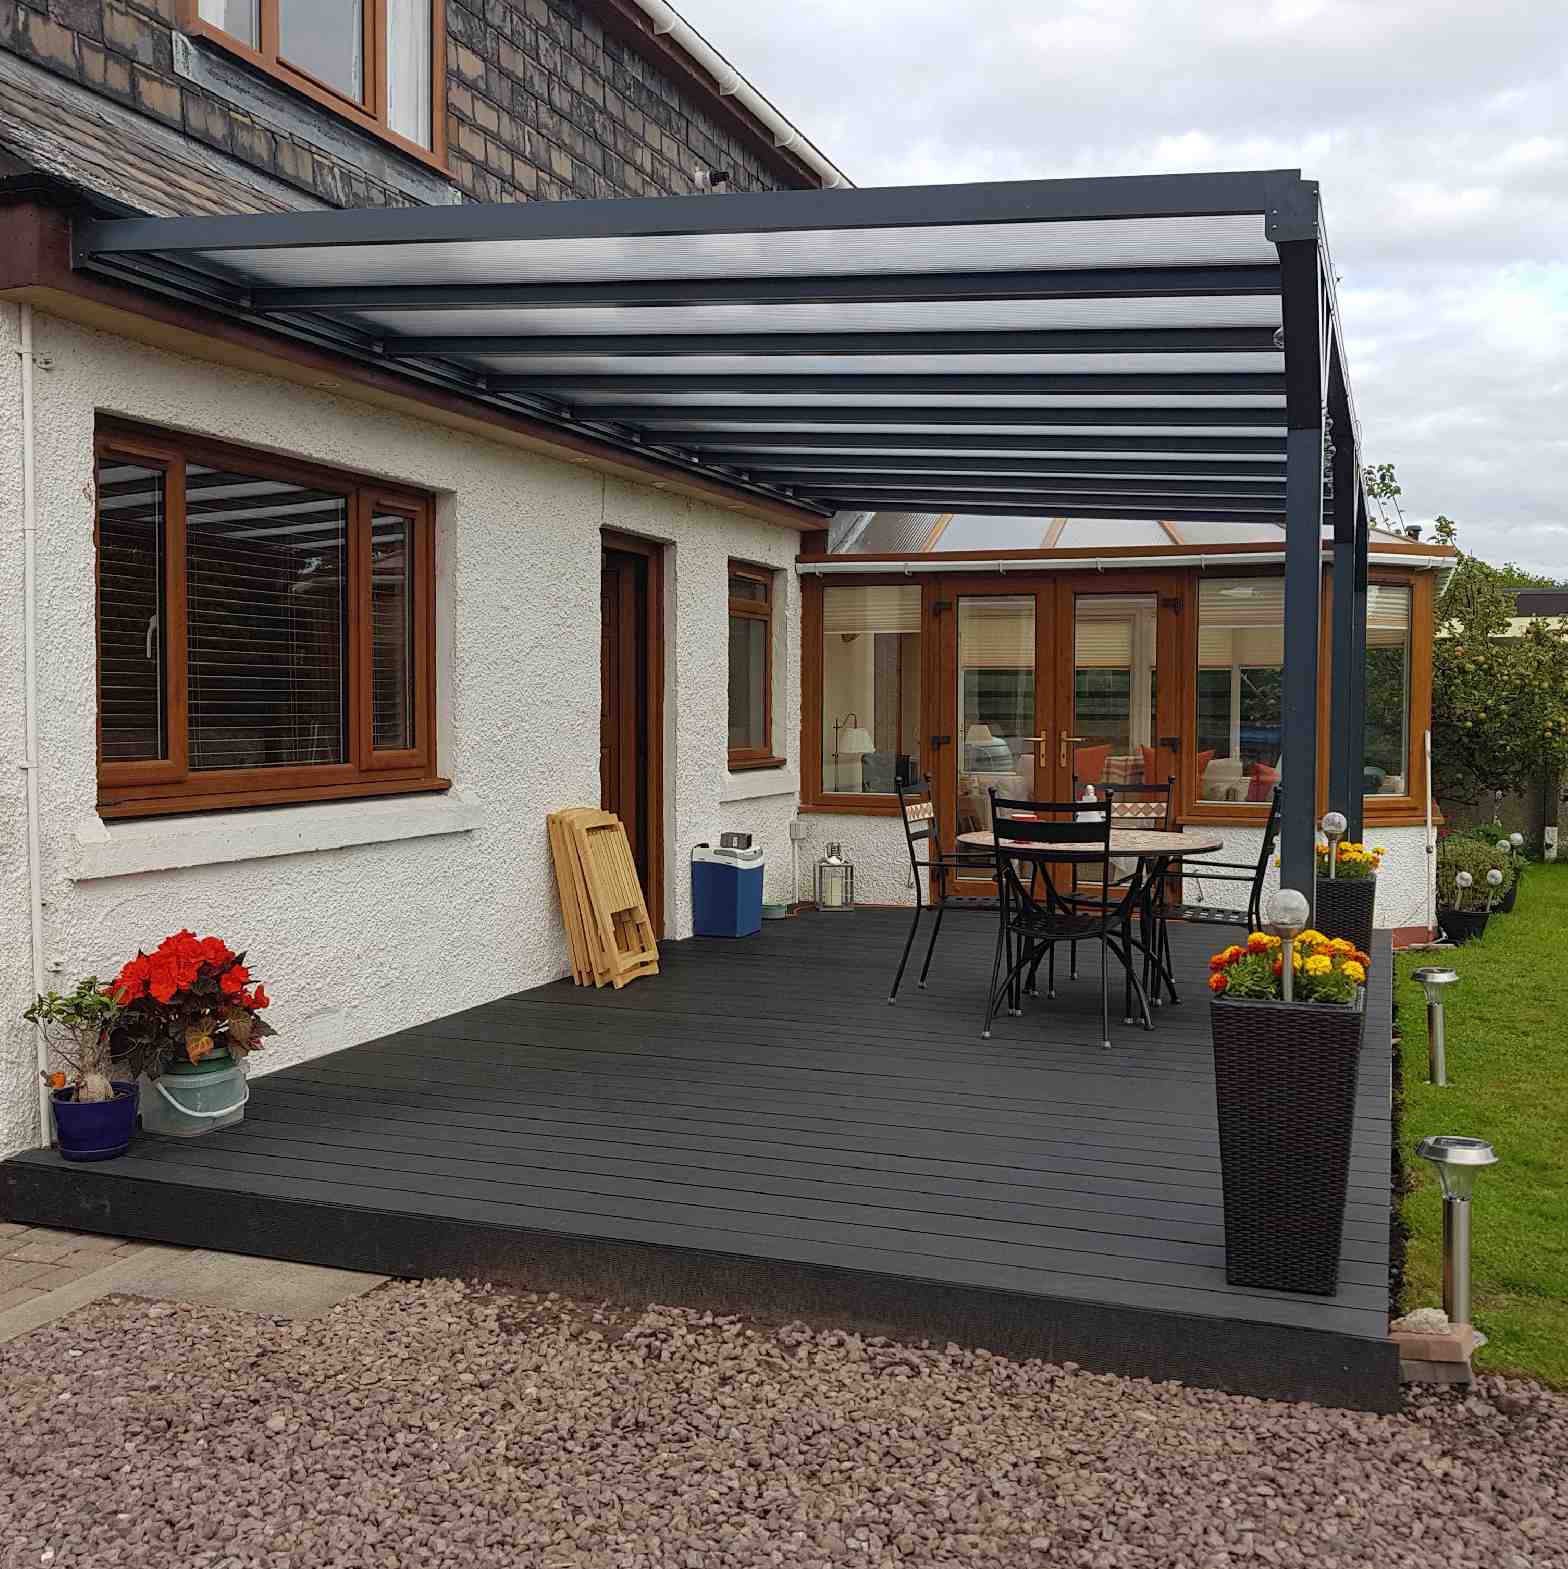 Buy Omega Verandah, Anthracite Grey, 16mm Polycarbonate Glazing - 12.0m (W) x 3.0m (P), (5) Supporting Posts online today